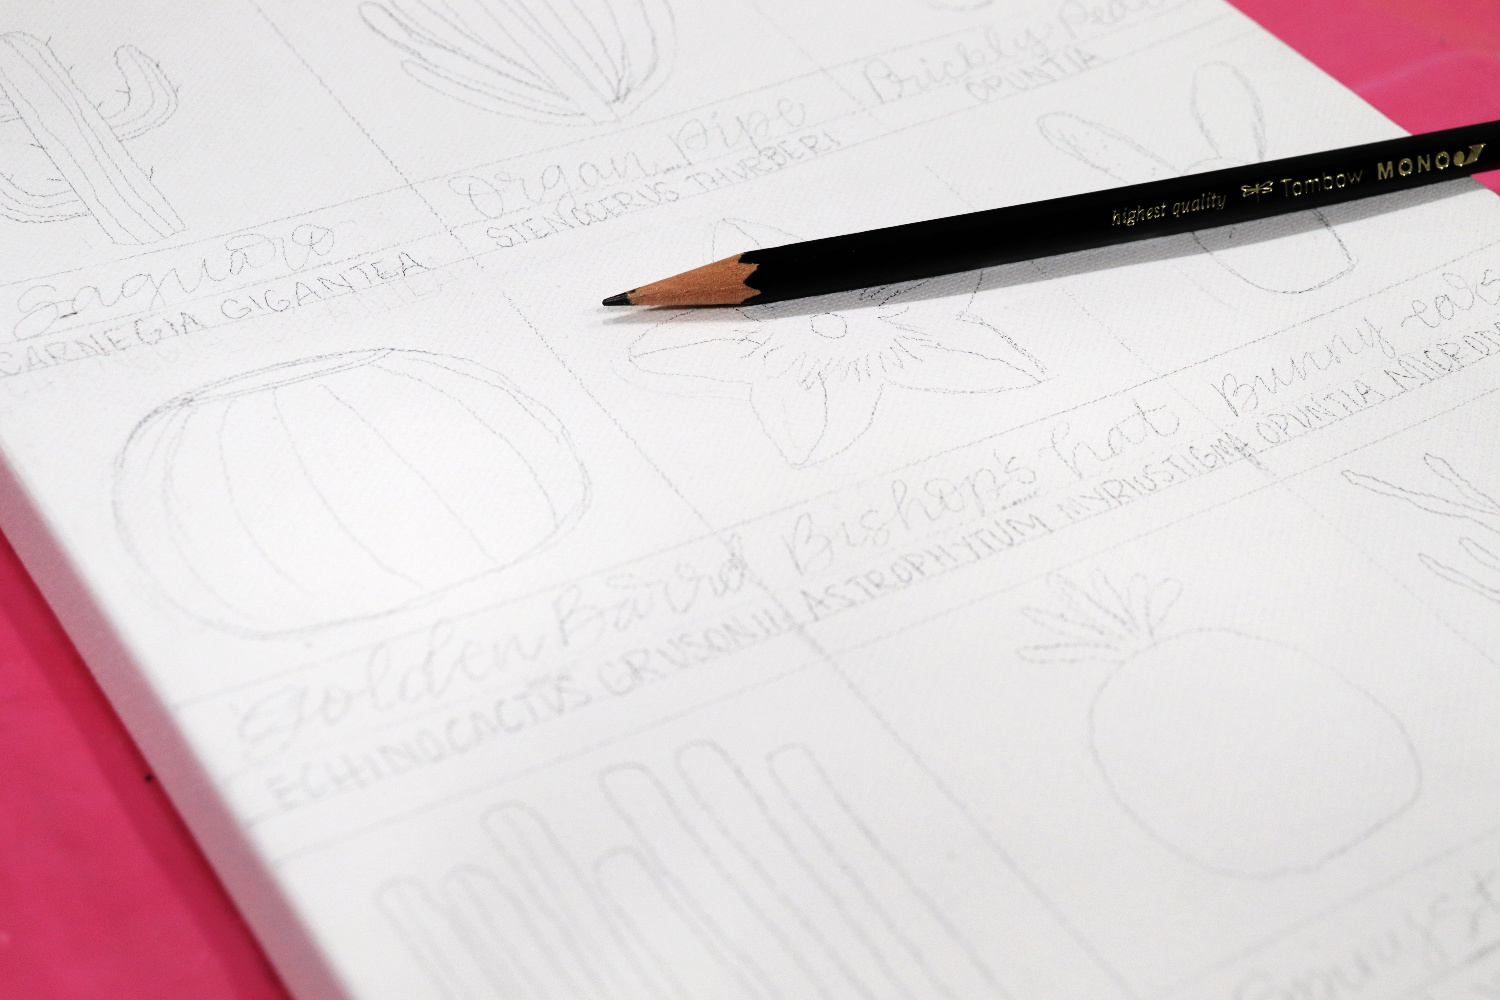 Image contains a close-up view of the white canvas with cactus sketches and names in pencil.